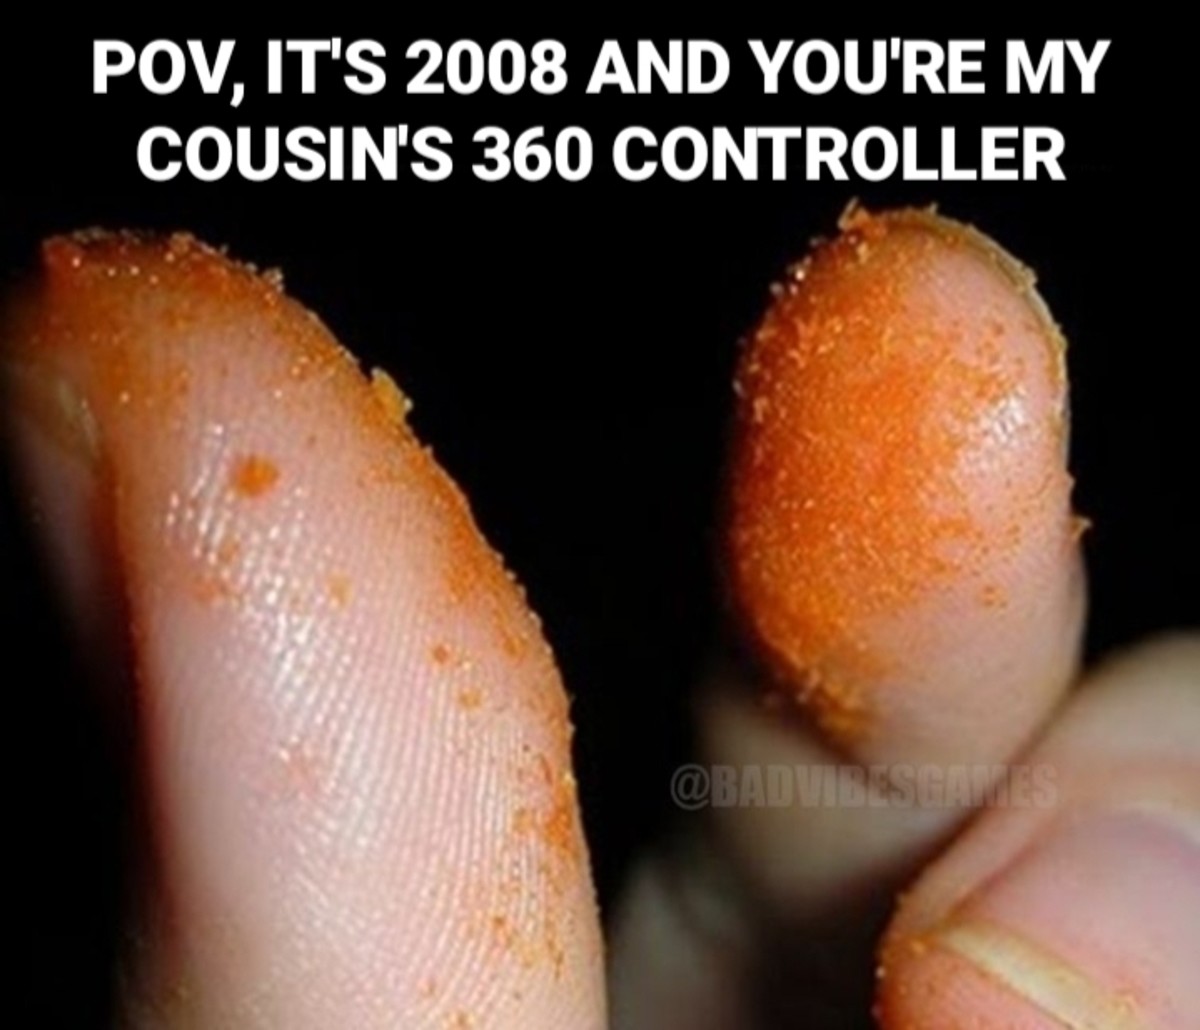 Procreation of the Cheeto'd. .. I can barely handle the feeling of Cheeto dust on my fingers by itself. I can't imagine using a controller with it.